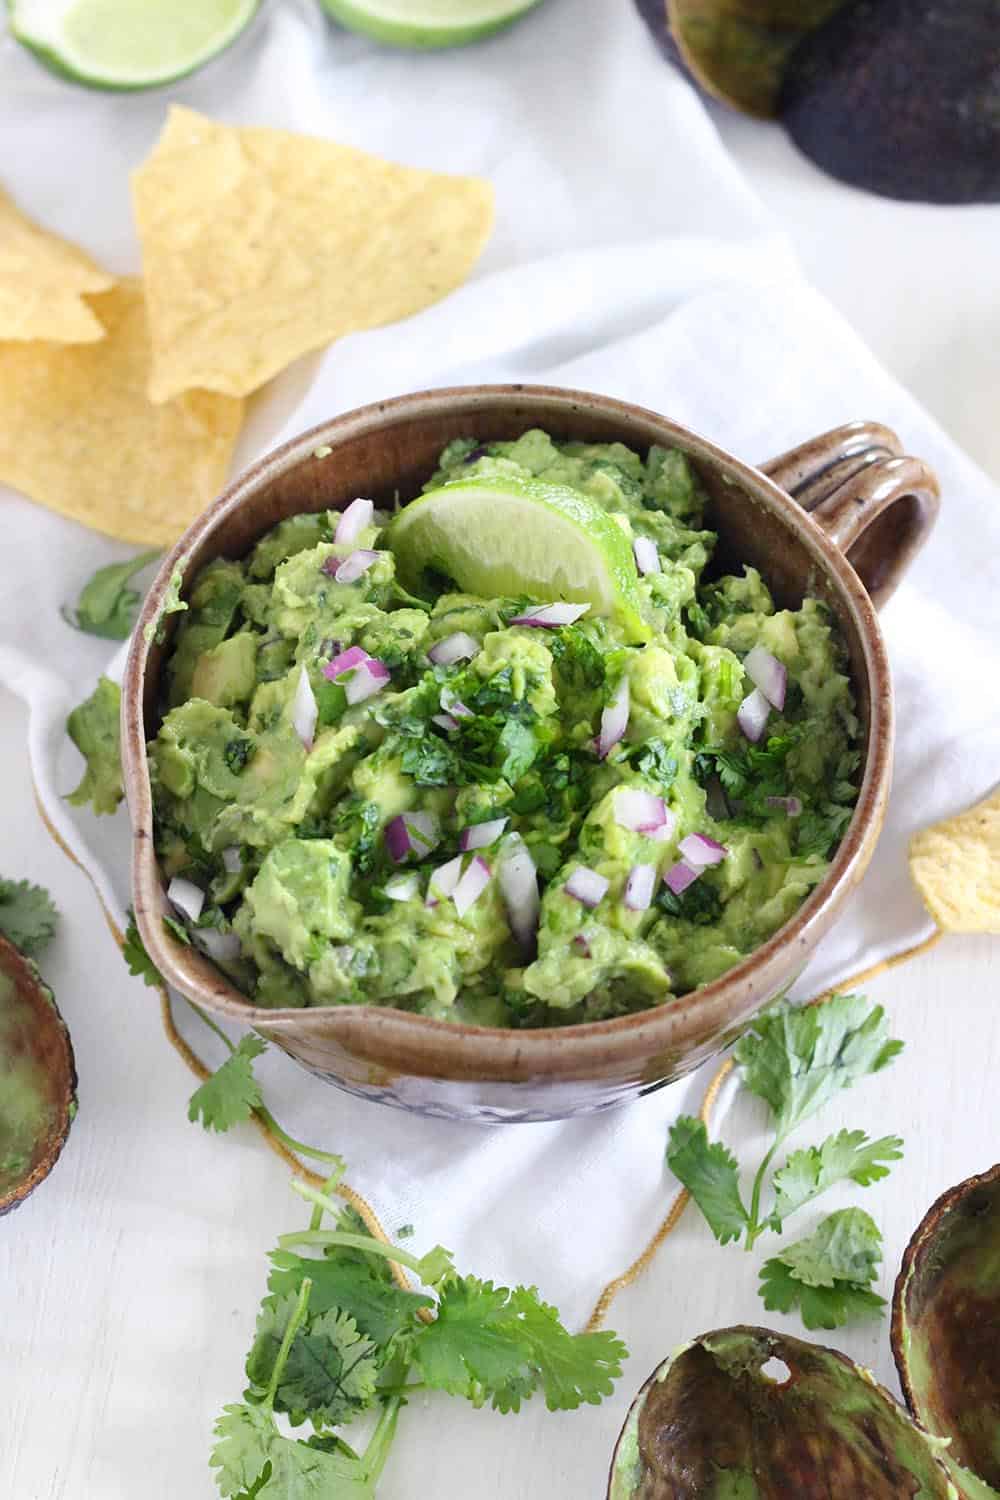 This simple guacamole recipe is truly the best- nothing but avocado, cilantro, lime juice, salt, and a little bit of red onion. The avocado is diced rather than mashed for the ideal chunky texture. Eat it with tortilla chips, on toast, on tacos or burritos, top eggs or fish or chicken with it, or eat with a spoon directly from the bowl!